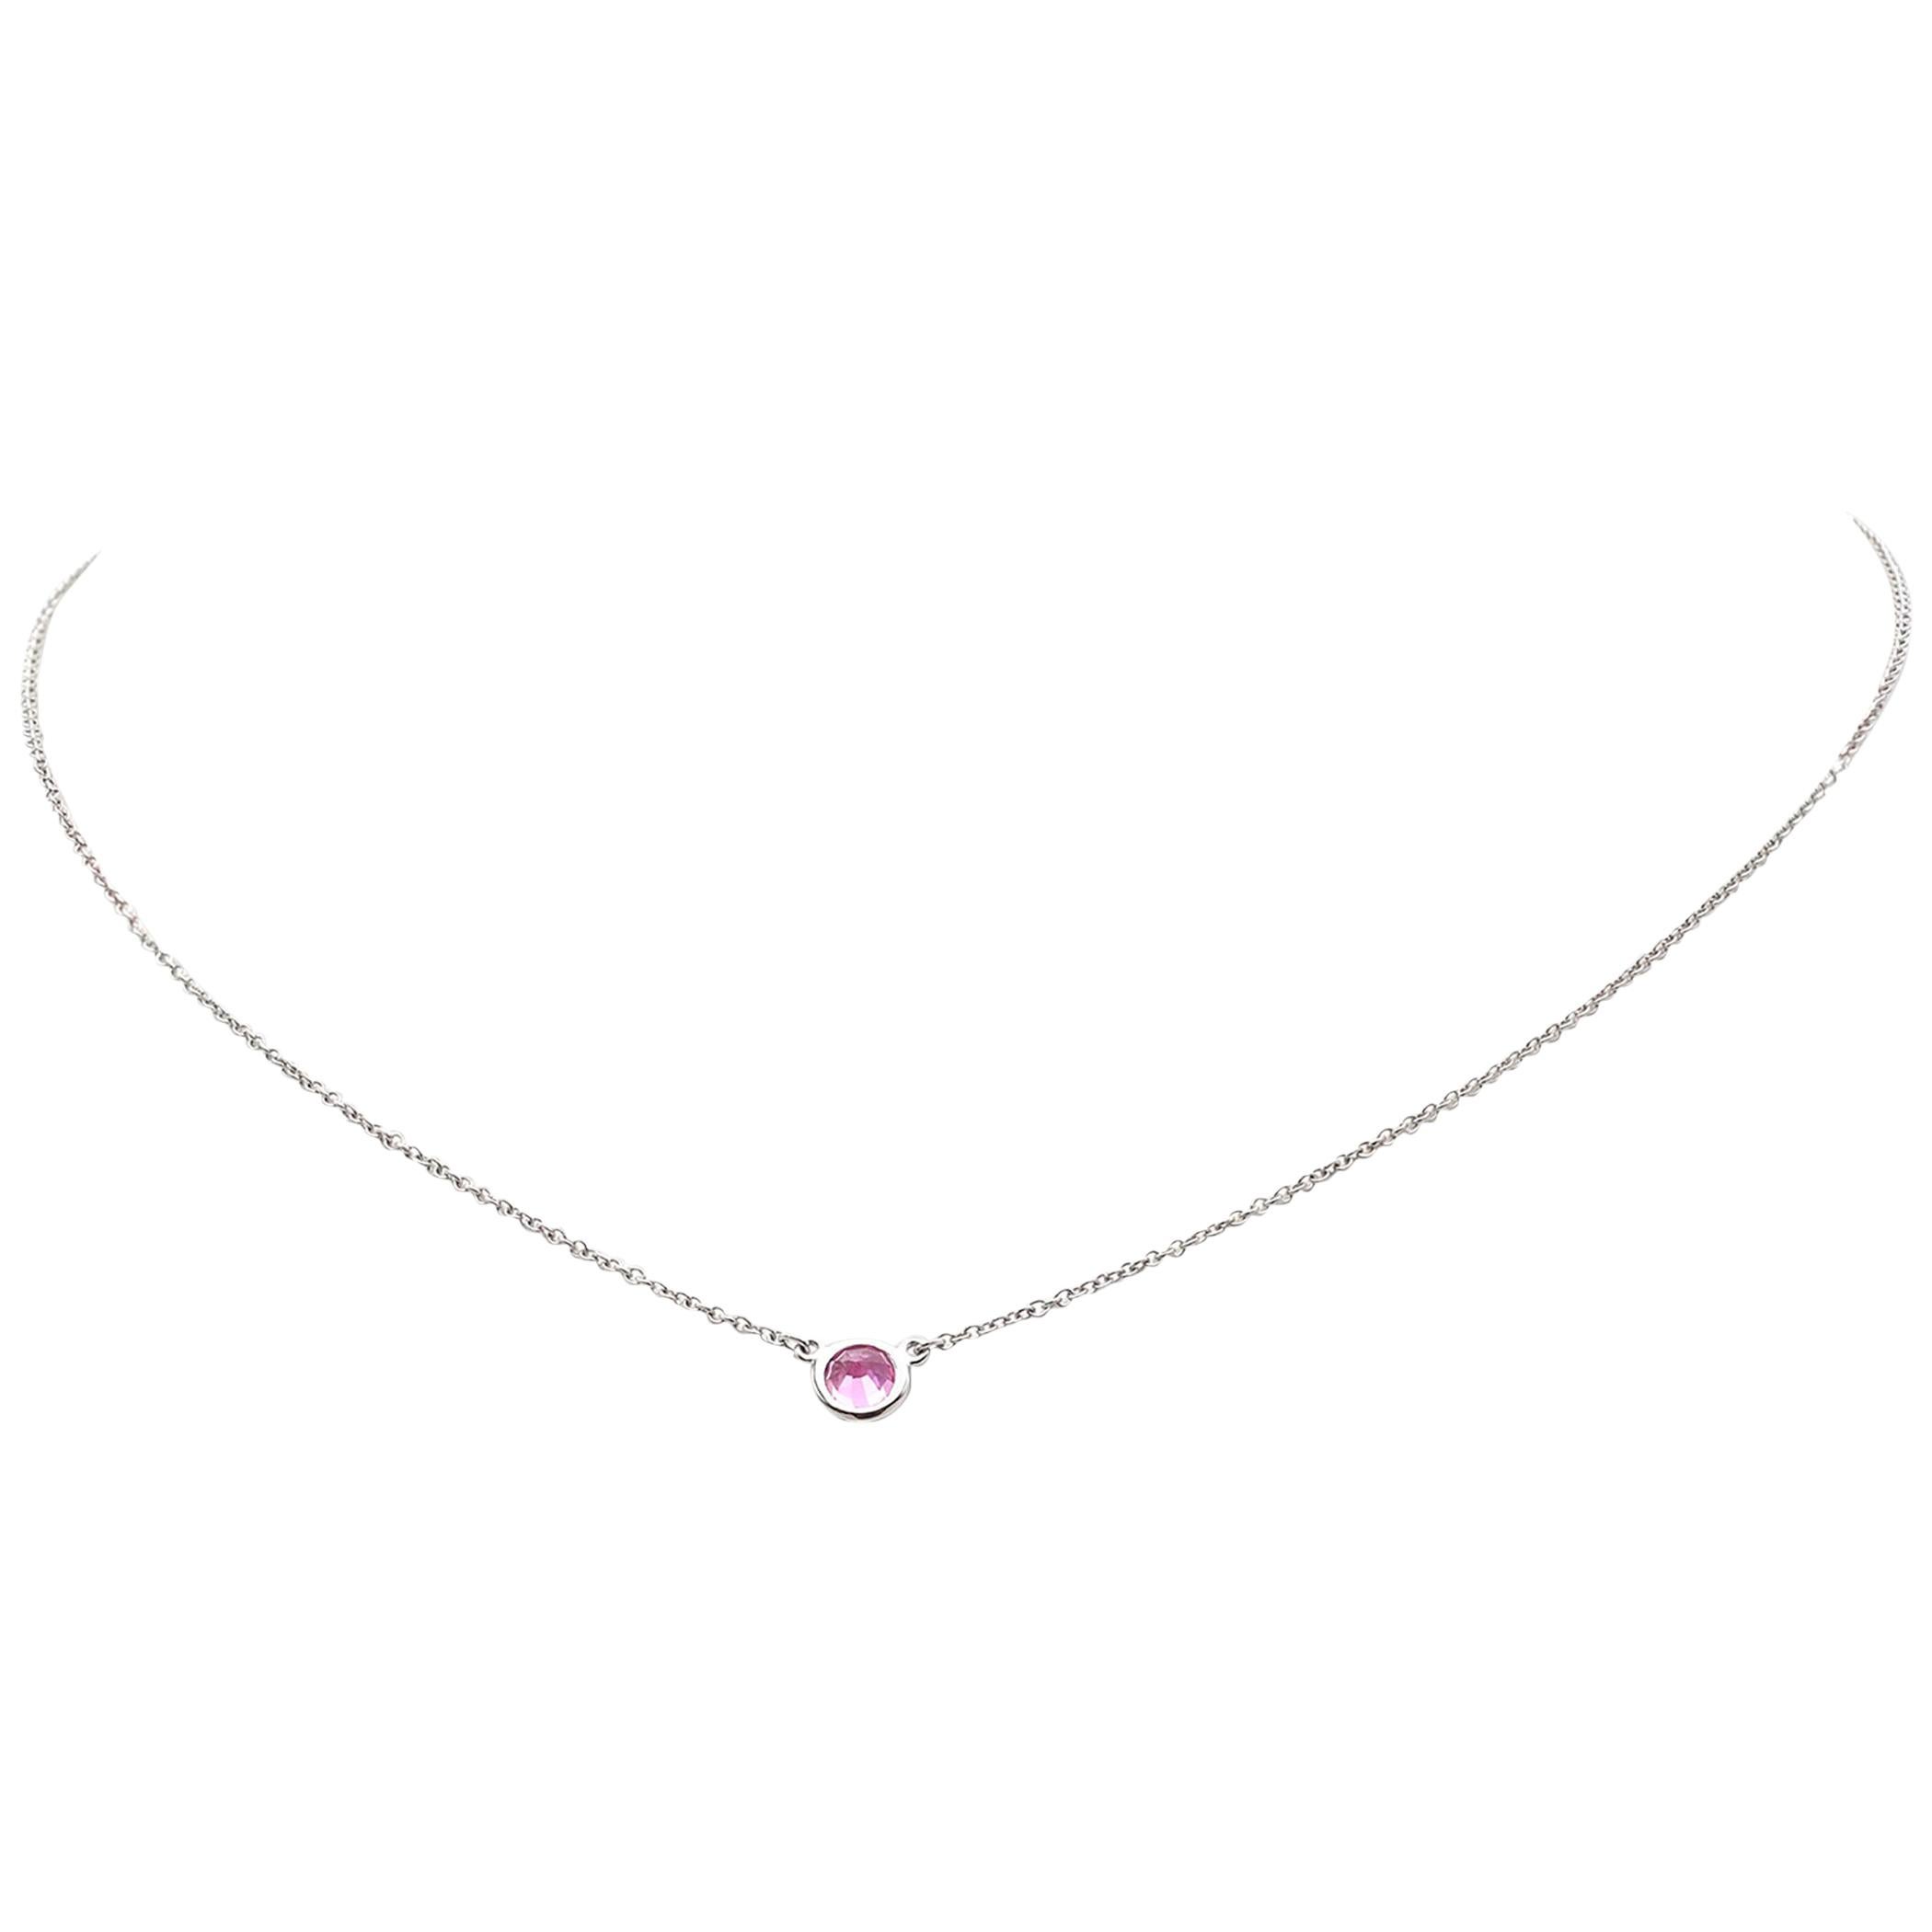 Elsa Peretti for Tiffany & Co. Color by the Yard Pink Sapphire Pendnat Necklace